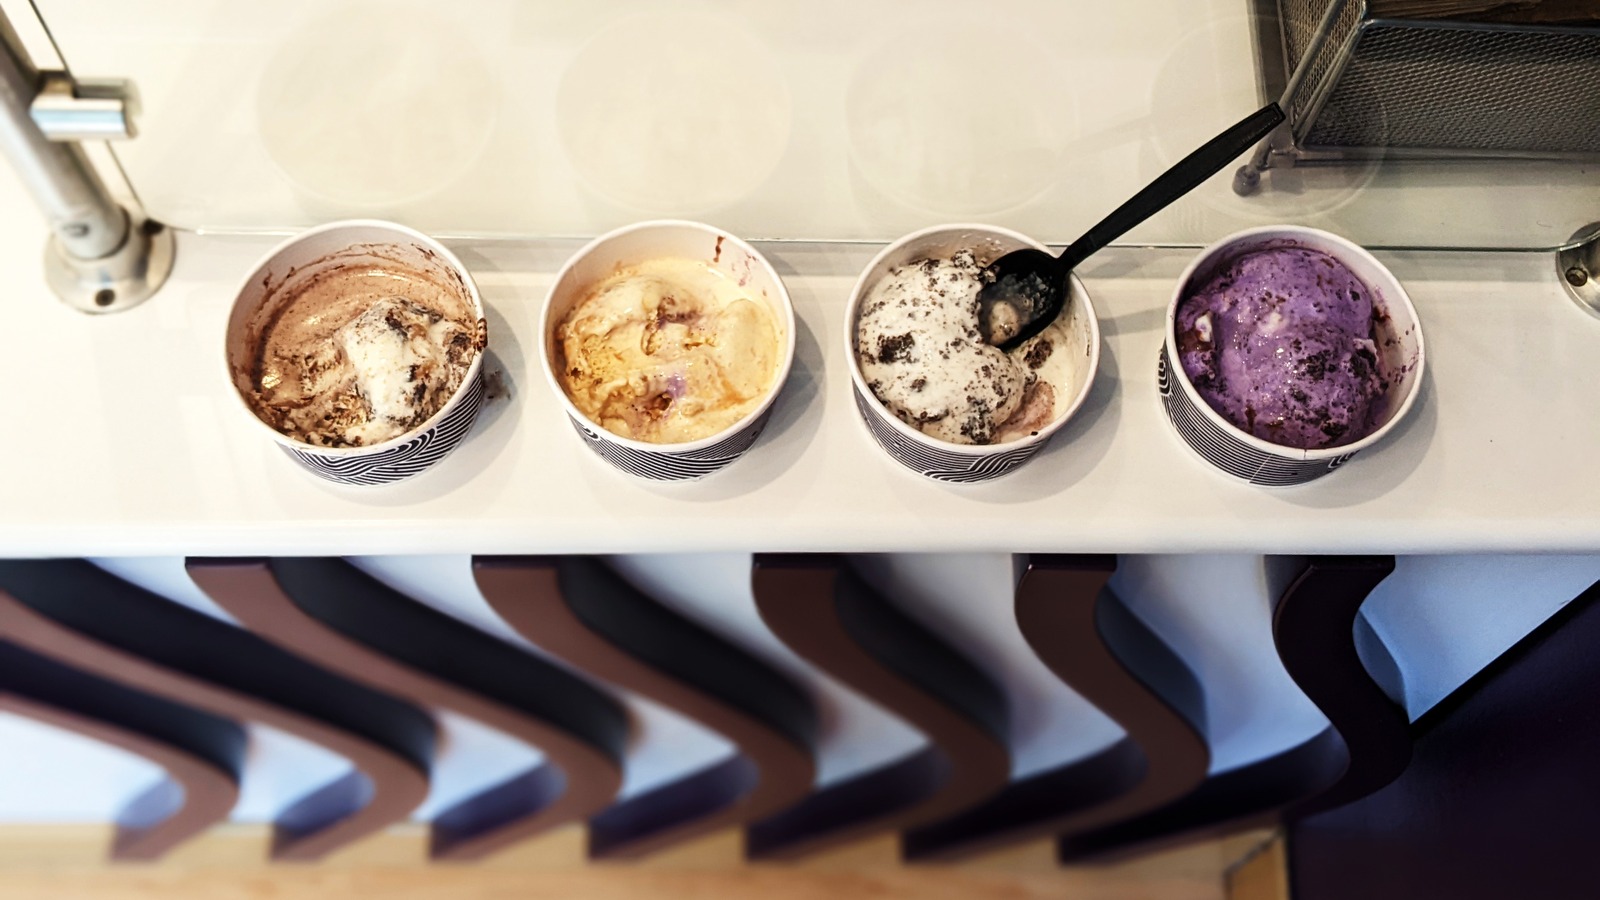 Every Insomnia Ice Cream Flavor Ranked Worst To Best